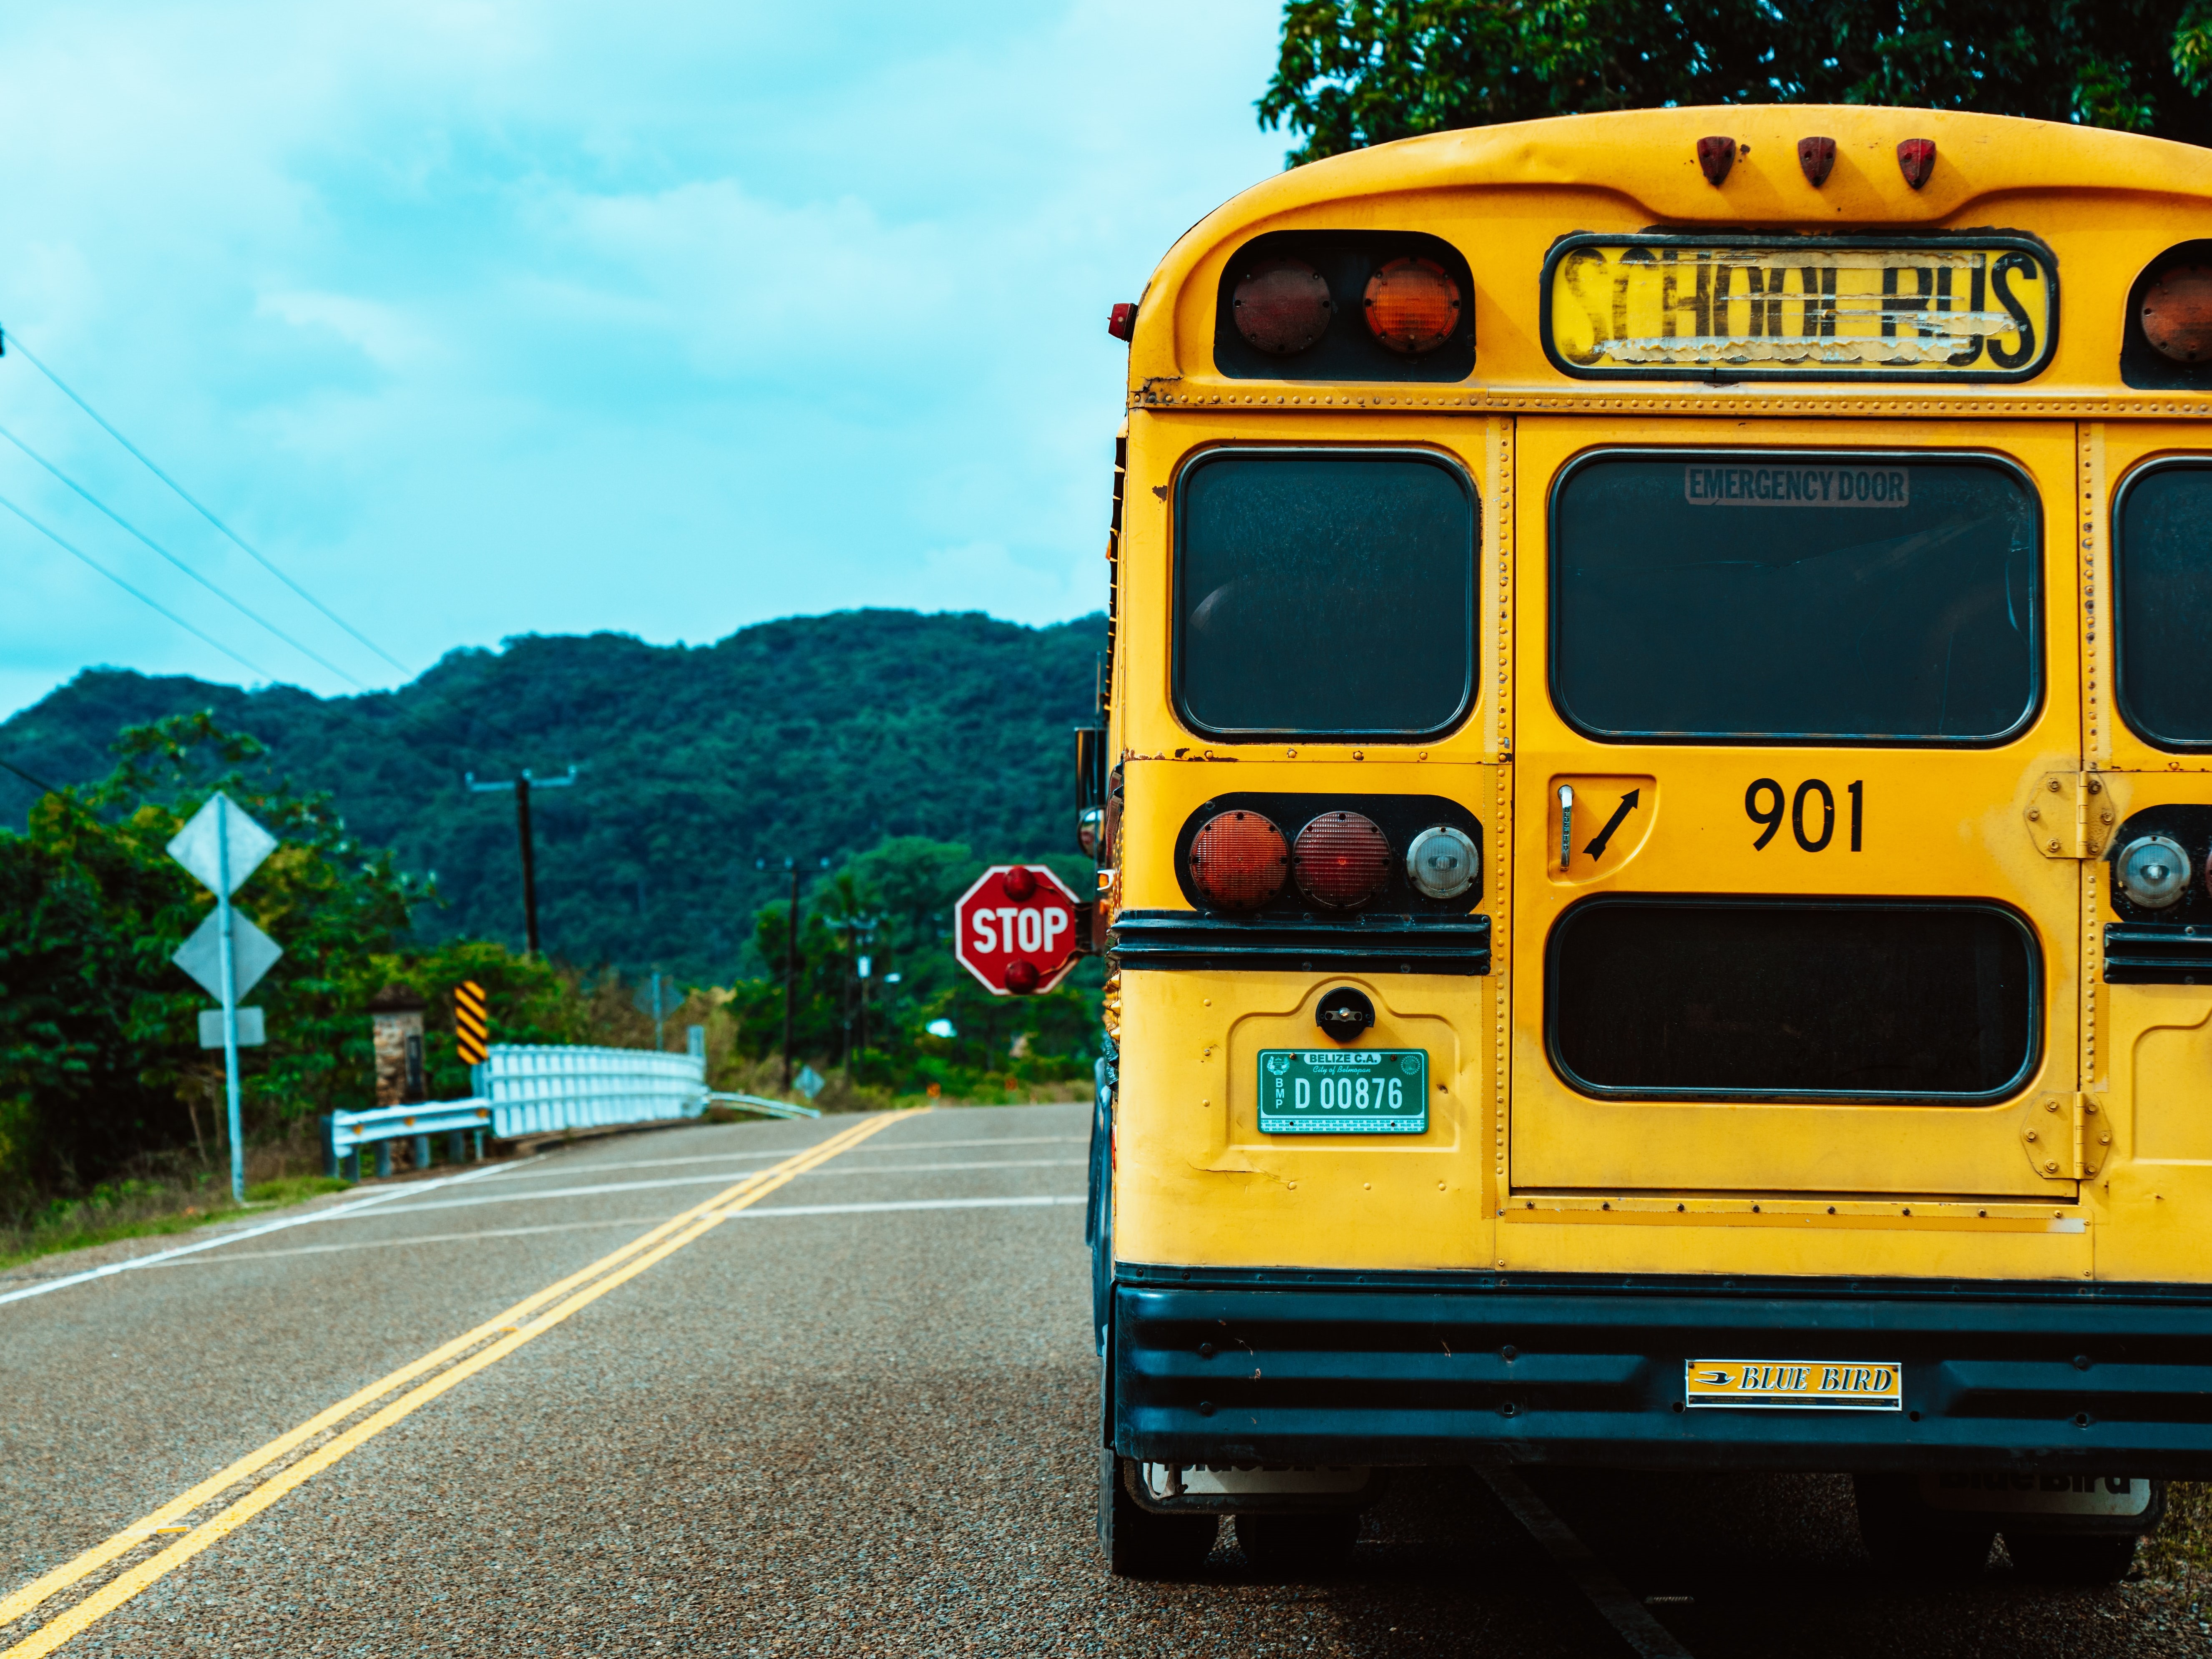 School bus traveling on a road